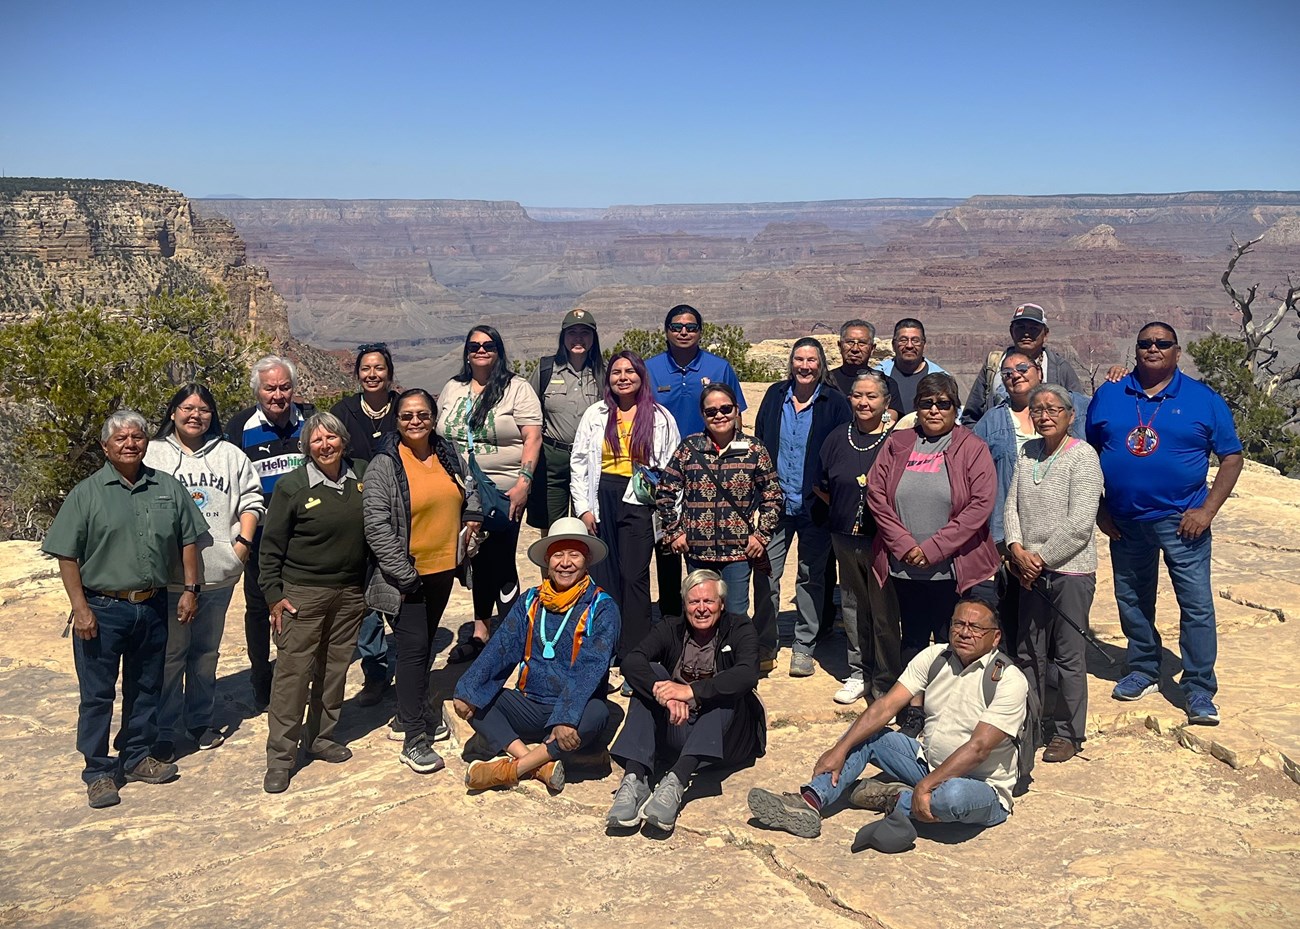 A group of approximately 15 individuals stand at the rim of the canyon for a posed photo.